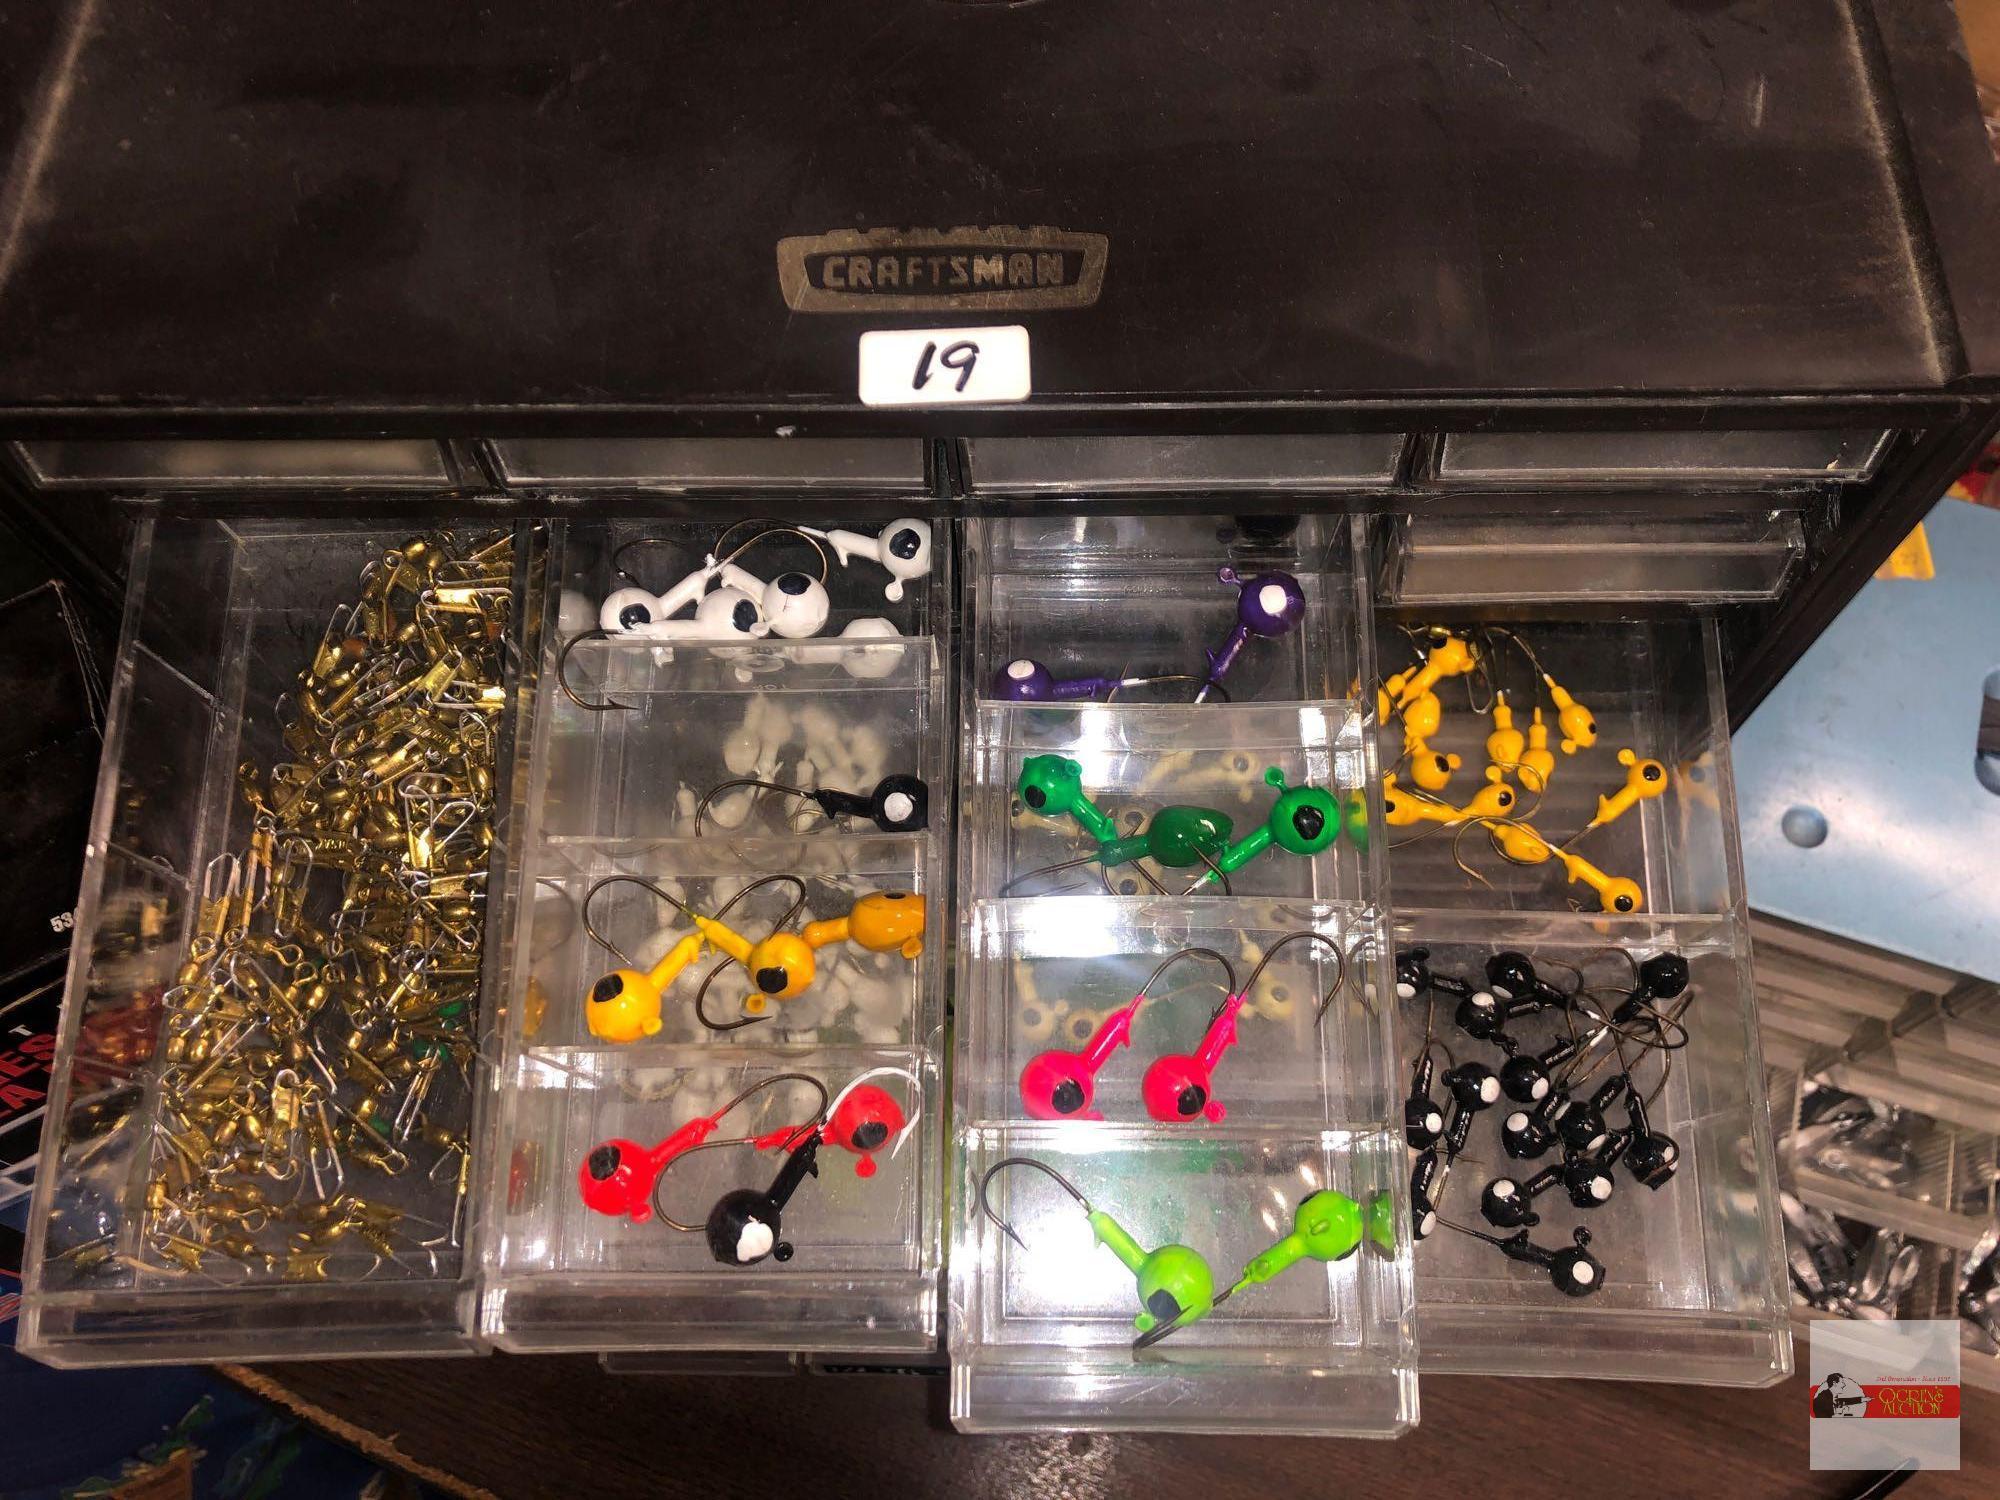 Fishing - Craftsman 40 drawer Organizer, 12.75"wx6.5"dx20"h with beads, flashers, spinners, hooks